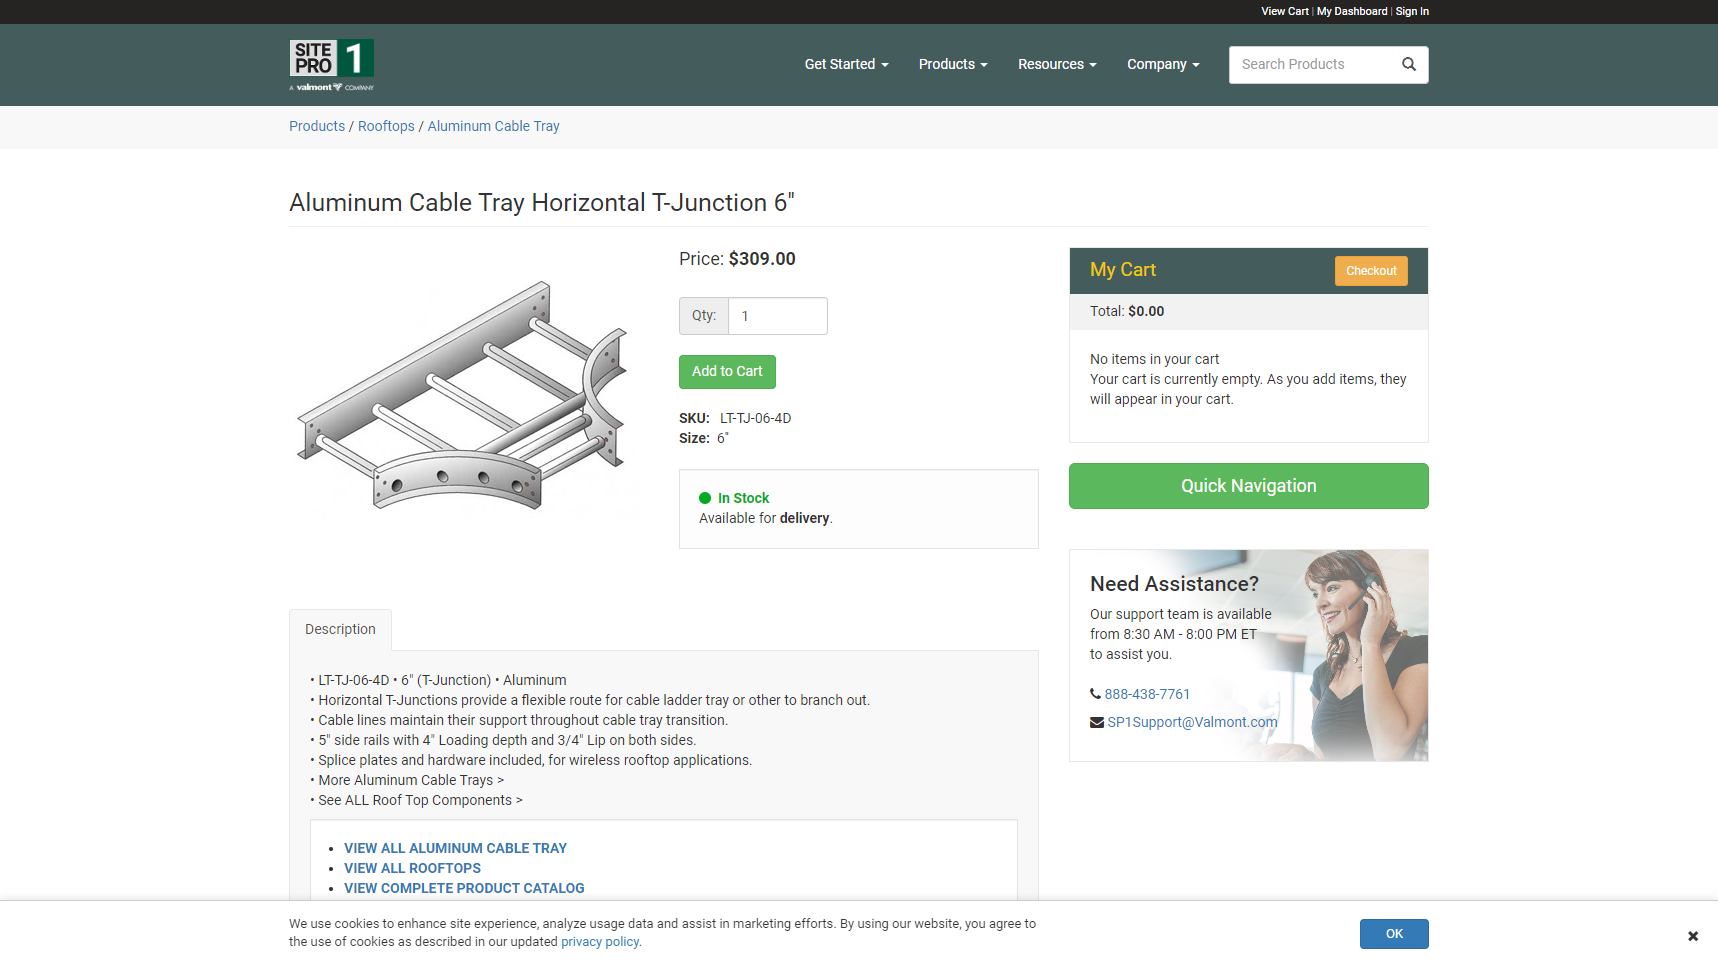 Site Pro 1 - Cable Tray Manufacturer